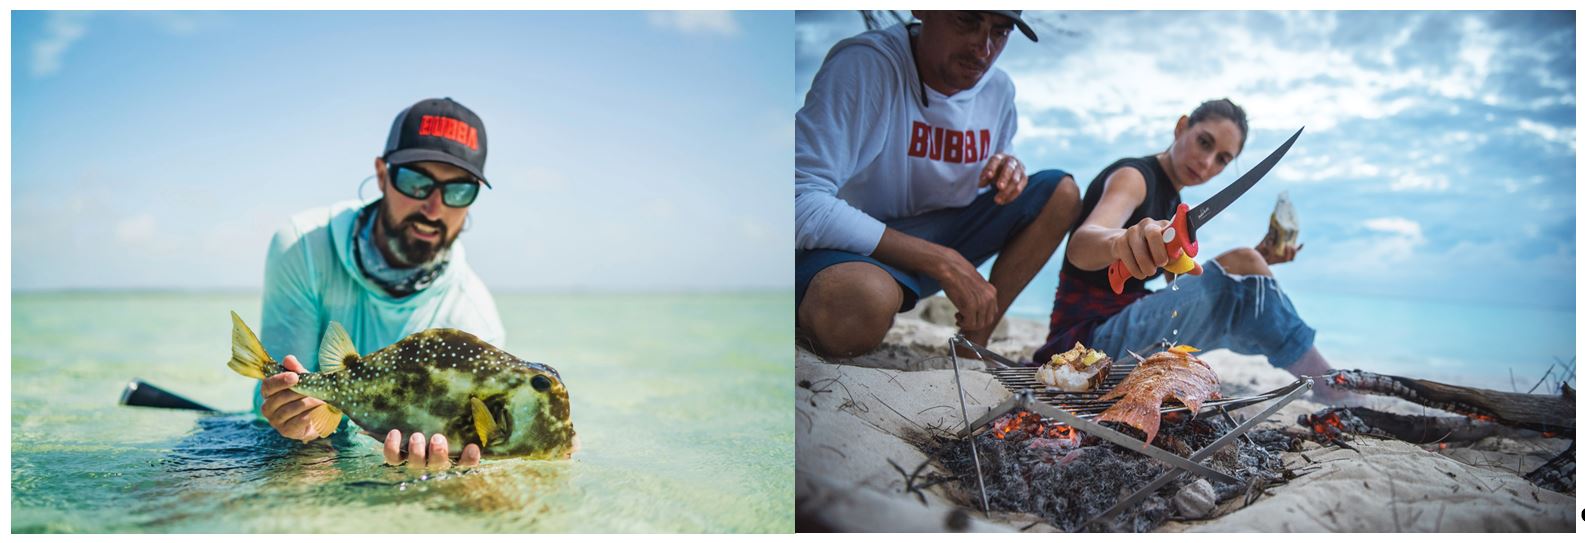 Bubba Blade Rebrands to Bubba – Ultimate Spearfishing – Home